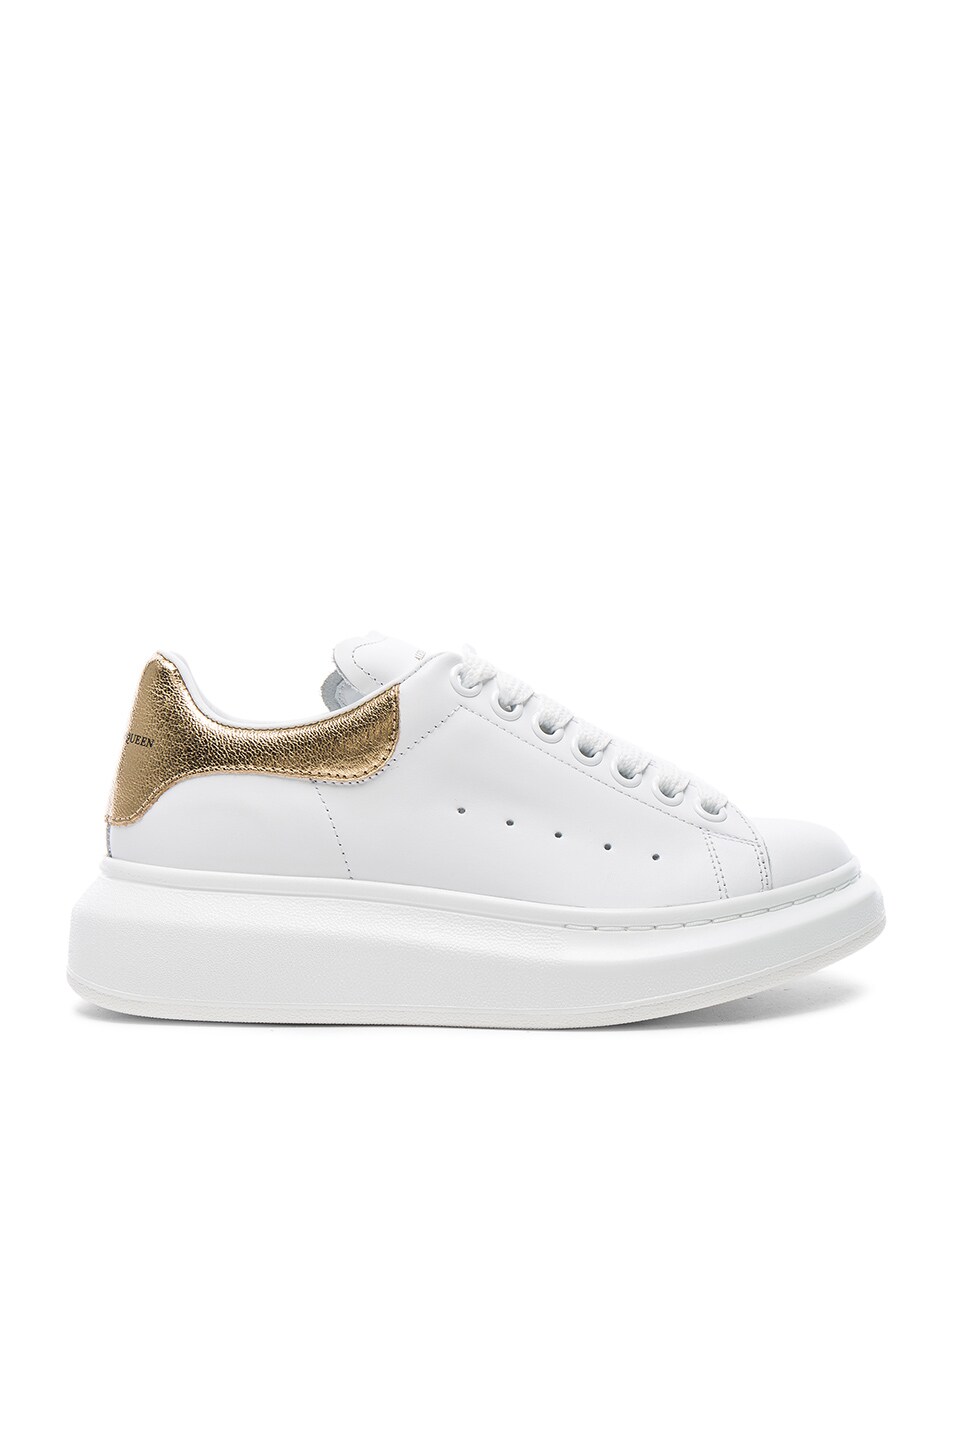 Image 1 of Alexander McQueen Leather Platform Lace Up Leather Sneakers in White & Light Gold